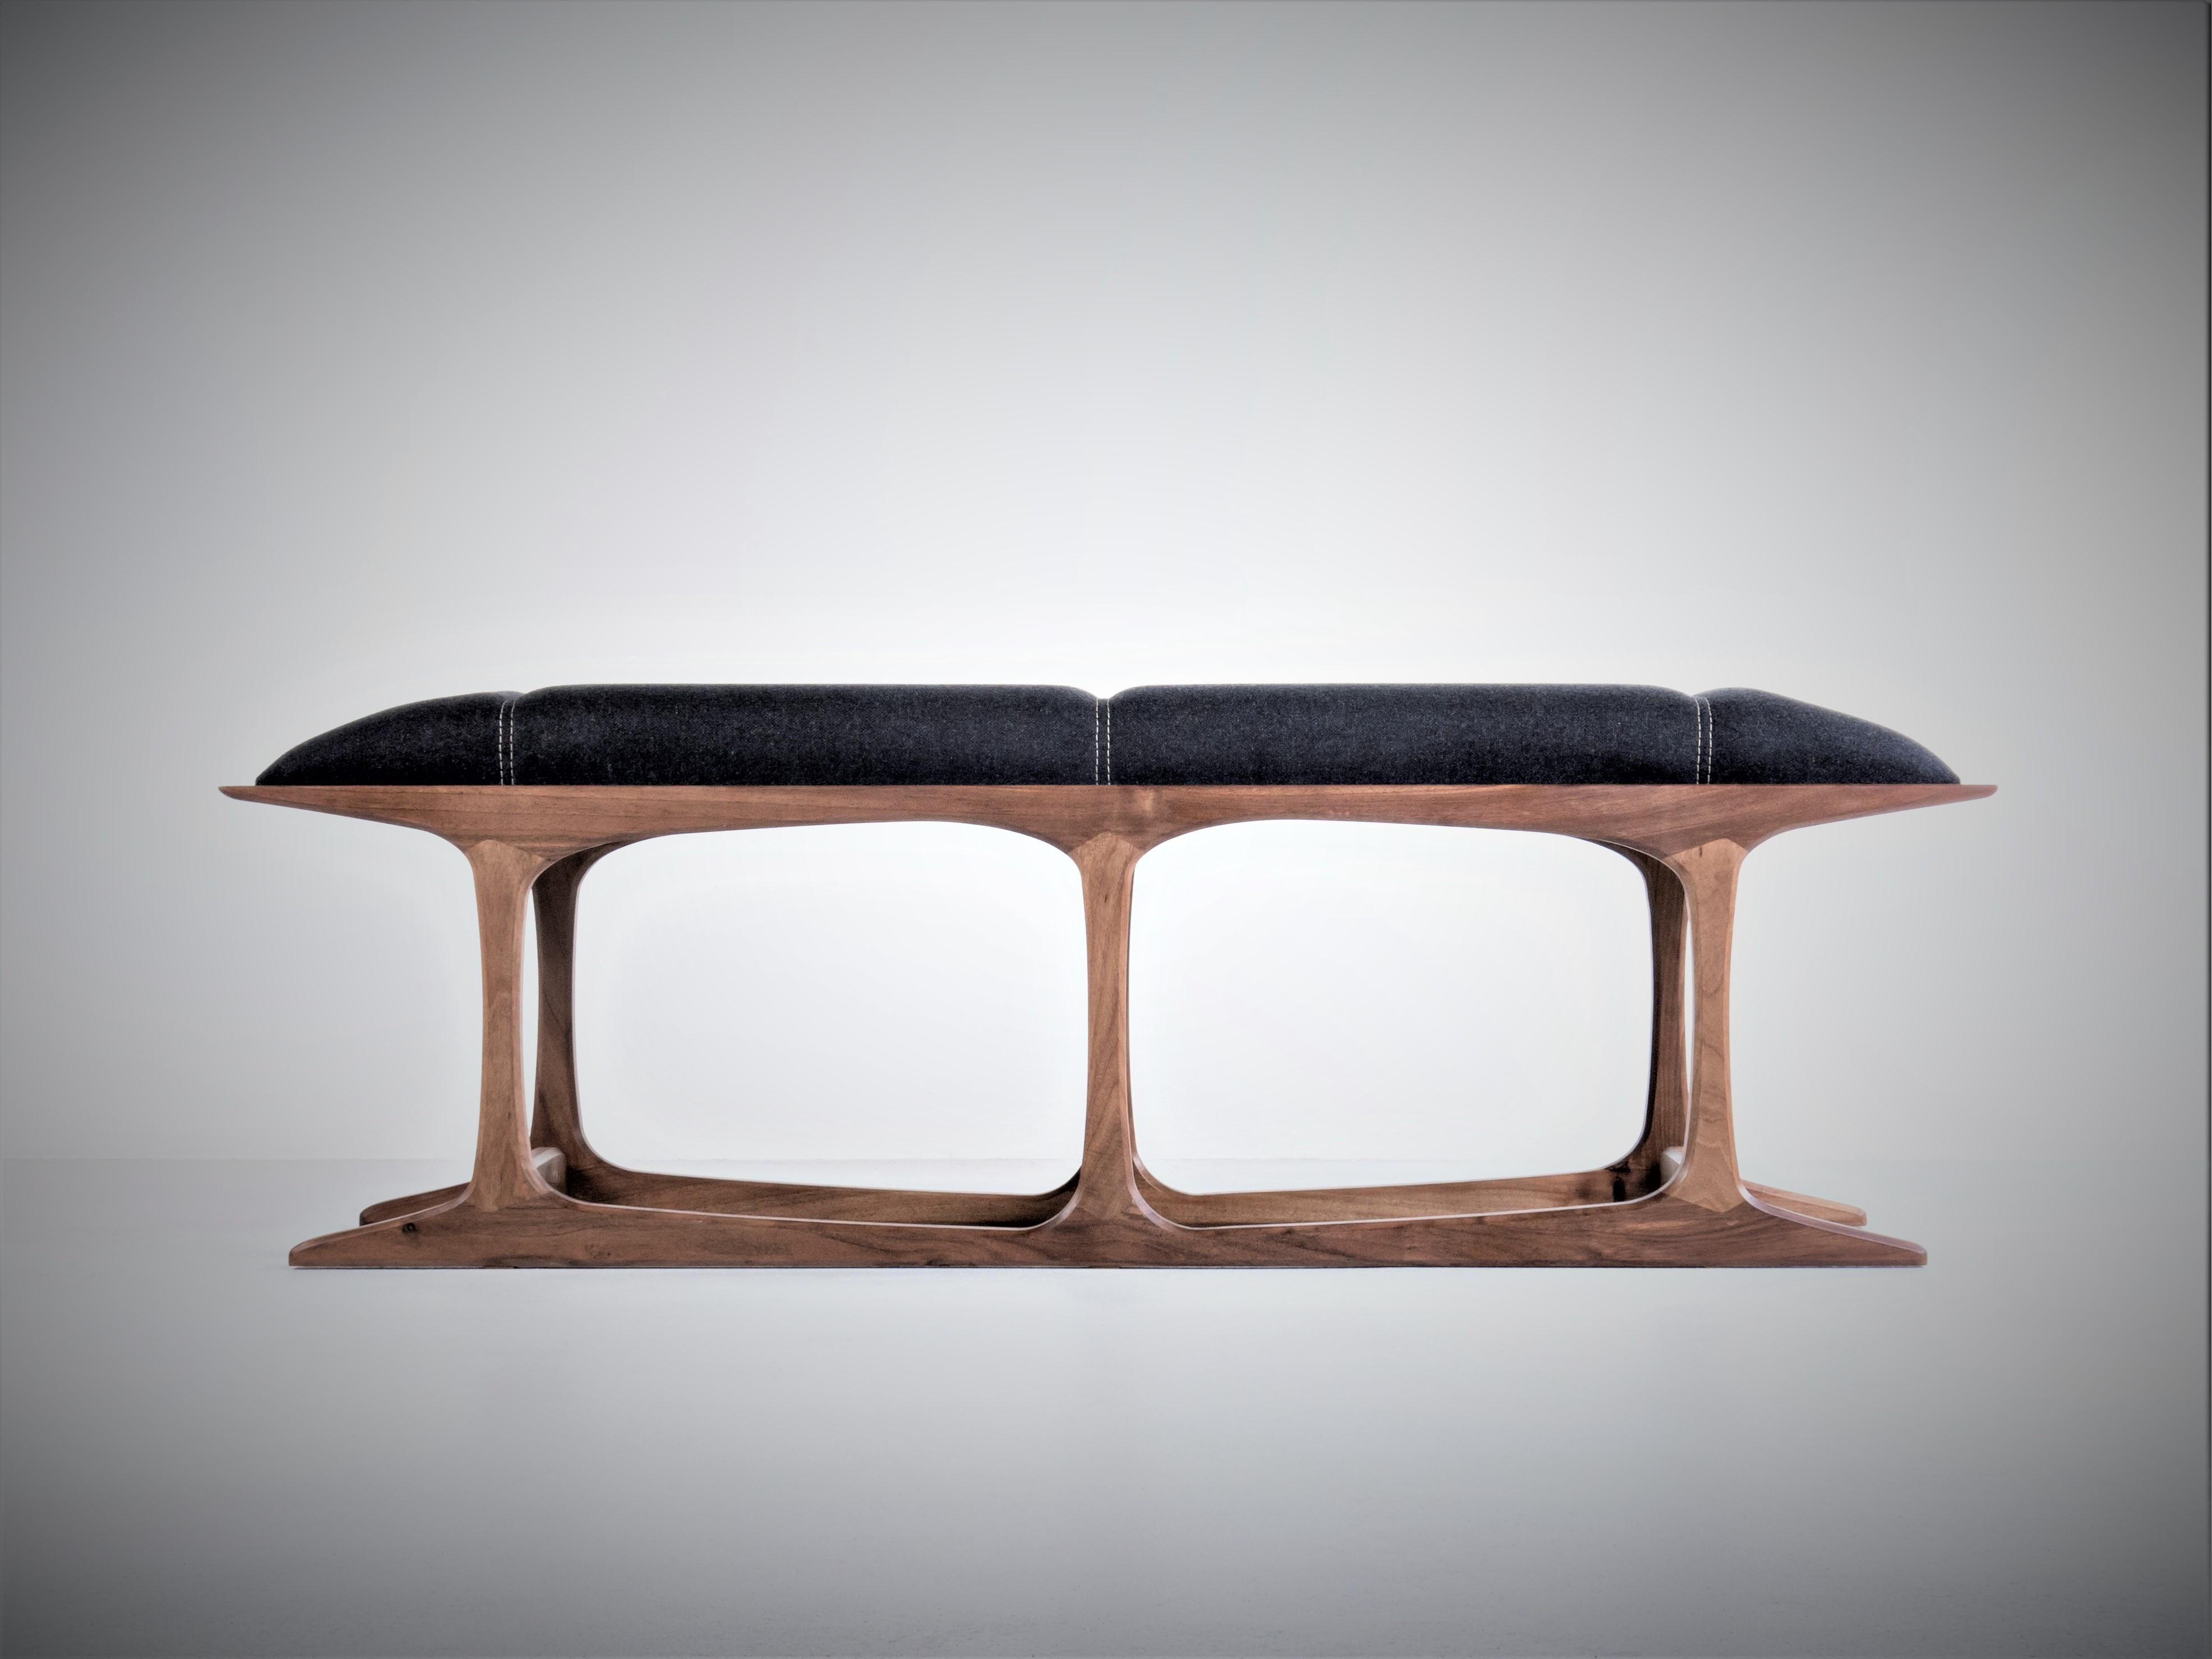 Modern Most Bench For Sale